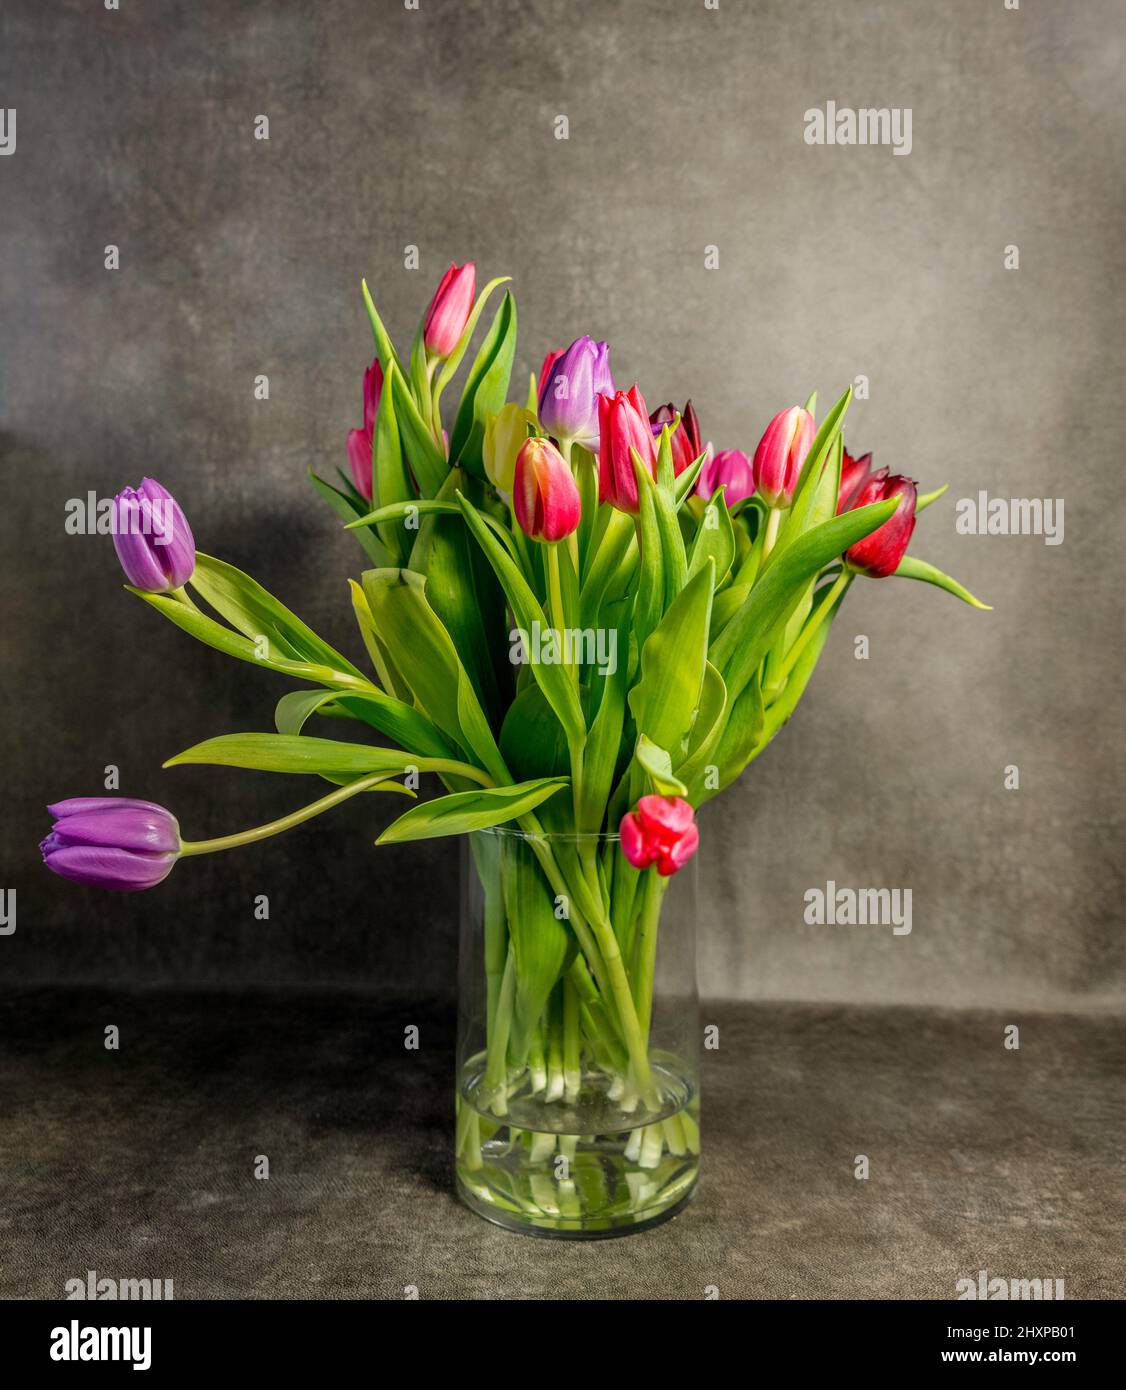 vase of glass with stil life of tulips Stock Photo